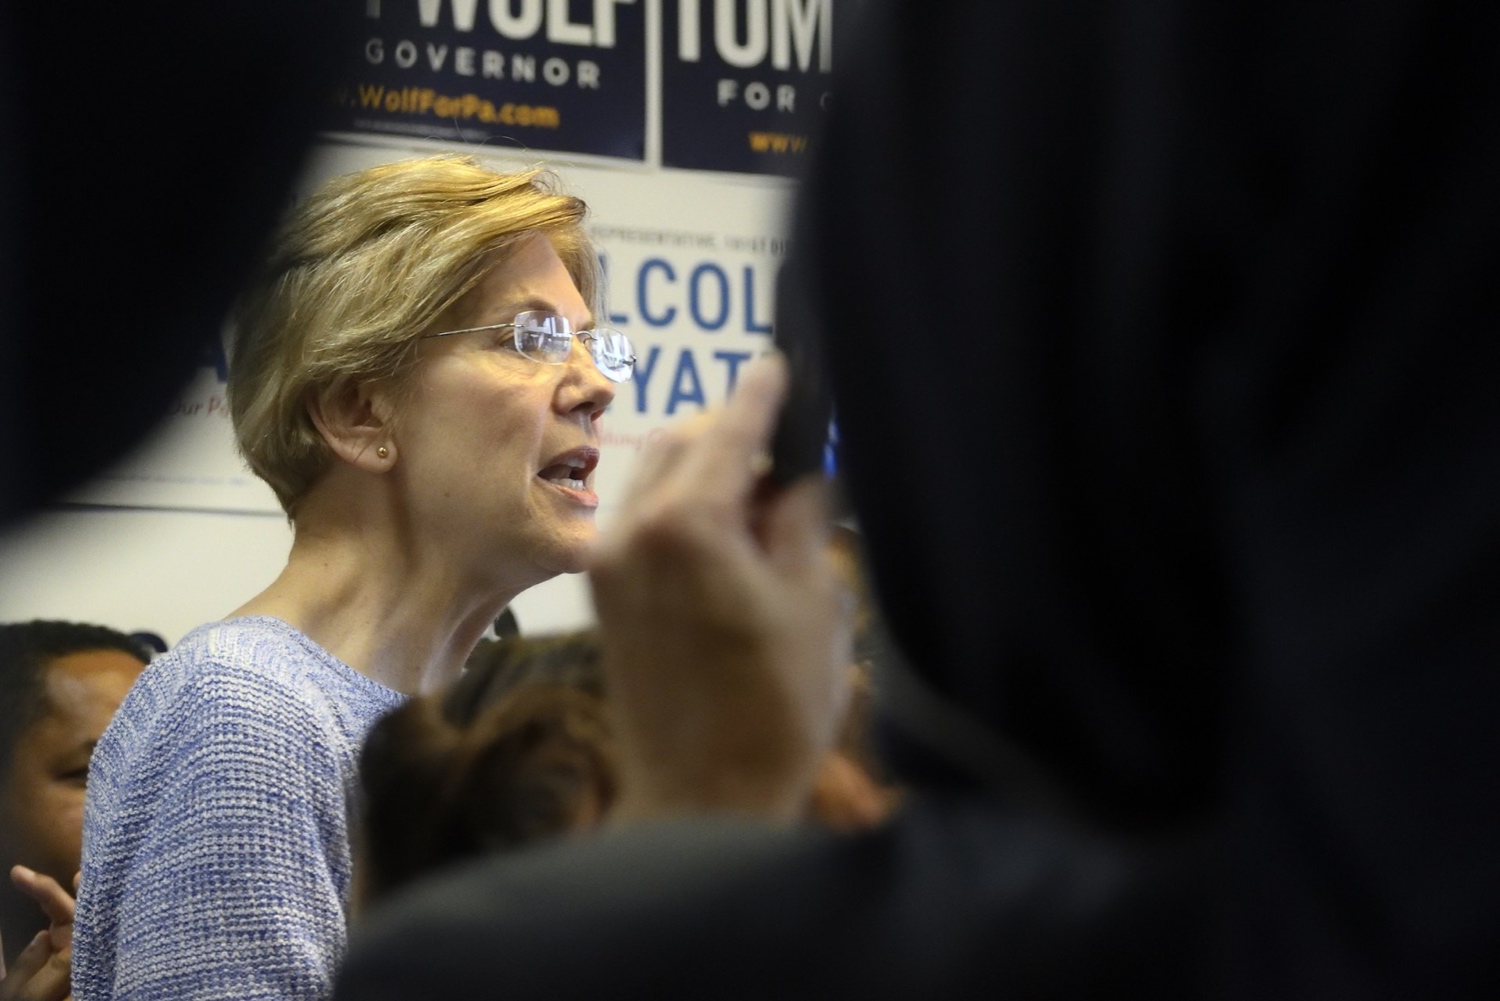 U.S. Sen. Elizabeth Warren (D-MA) speaks at a canvas kick-off event in support of the campaign to re-elect U.S. Sen. Bob Casey (D-PA) at a field office in North Philadelphia, PA, on September 23, 2018. (Photo by Bastiaan Slabbers